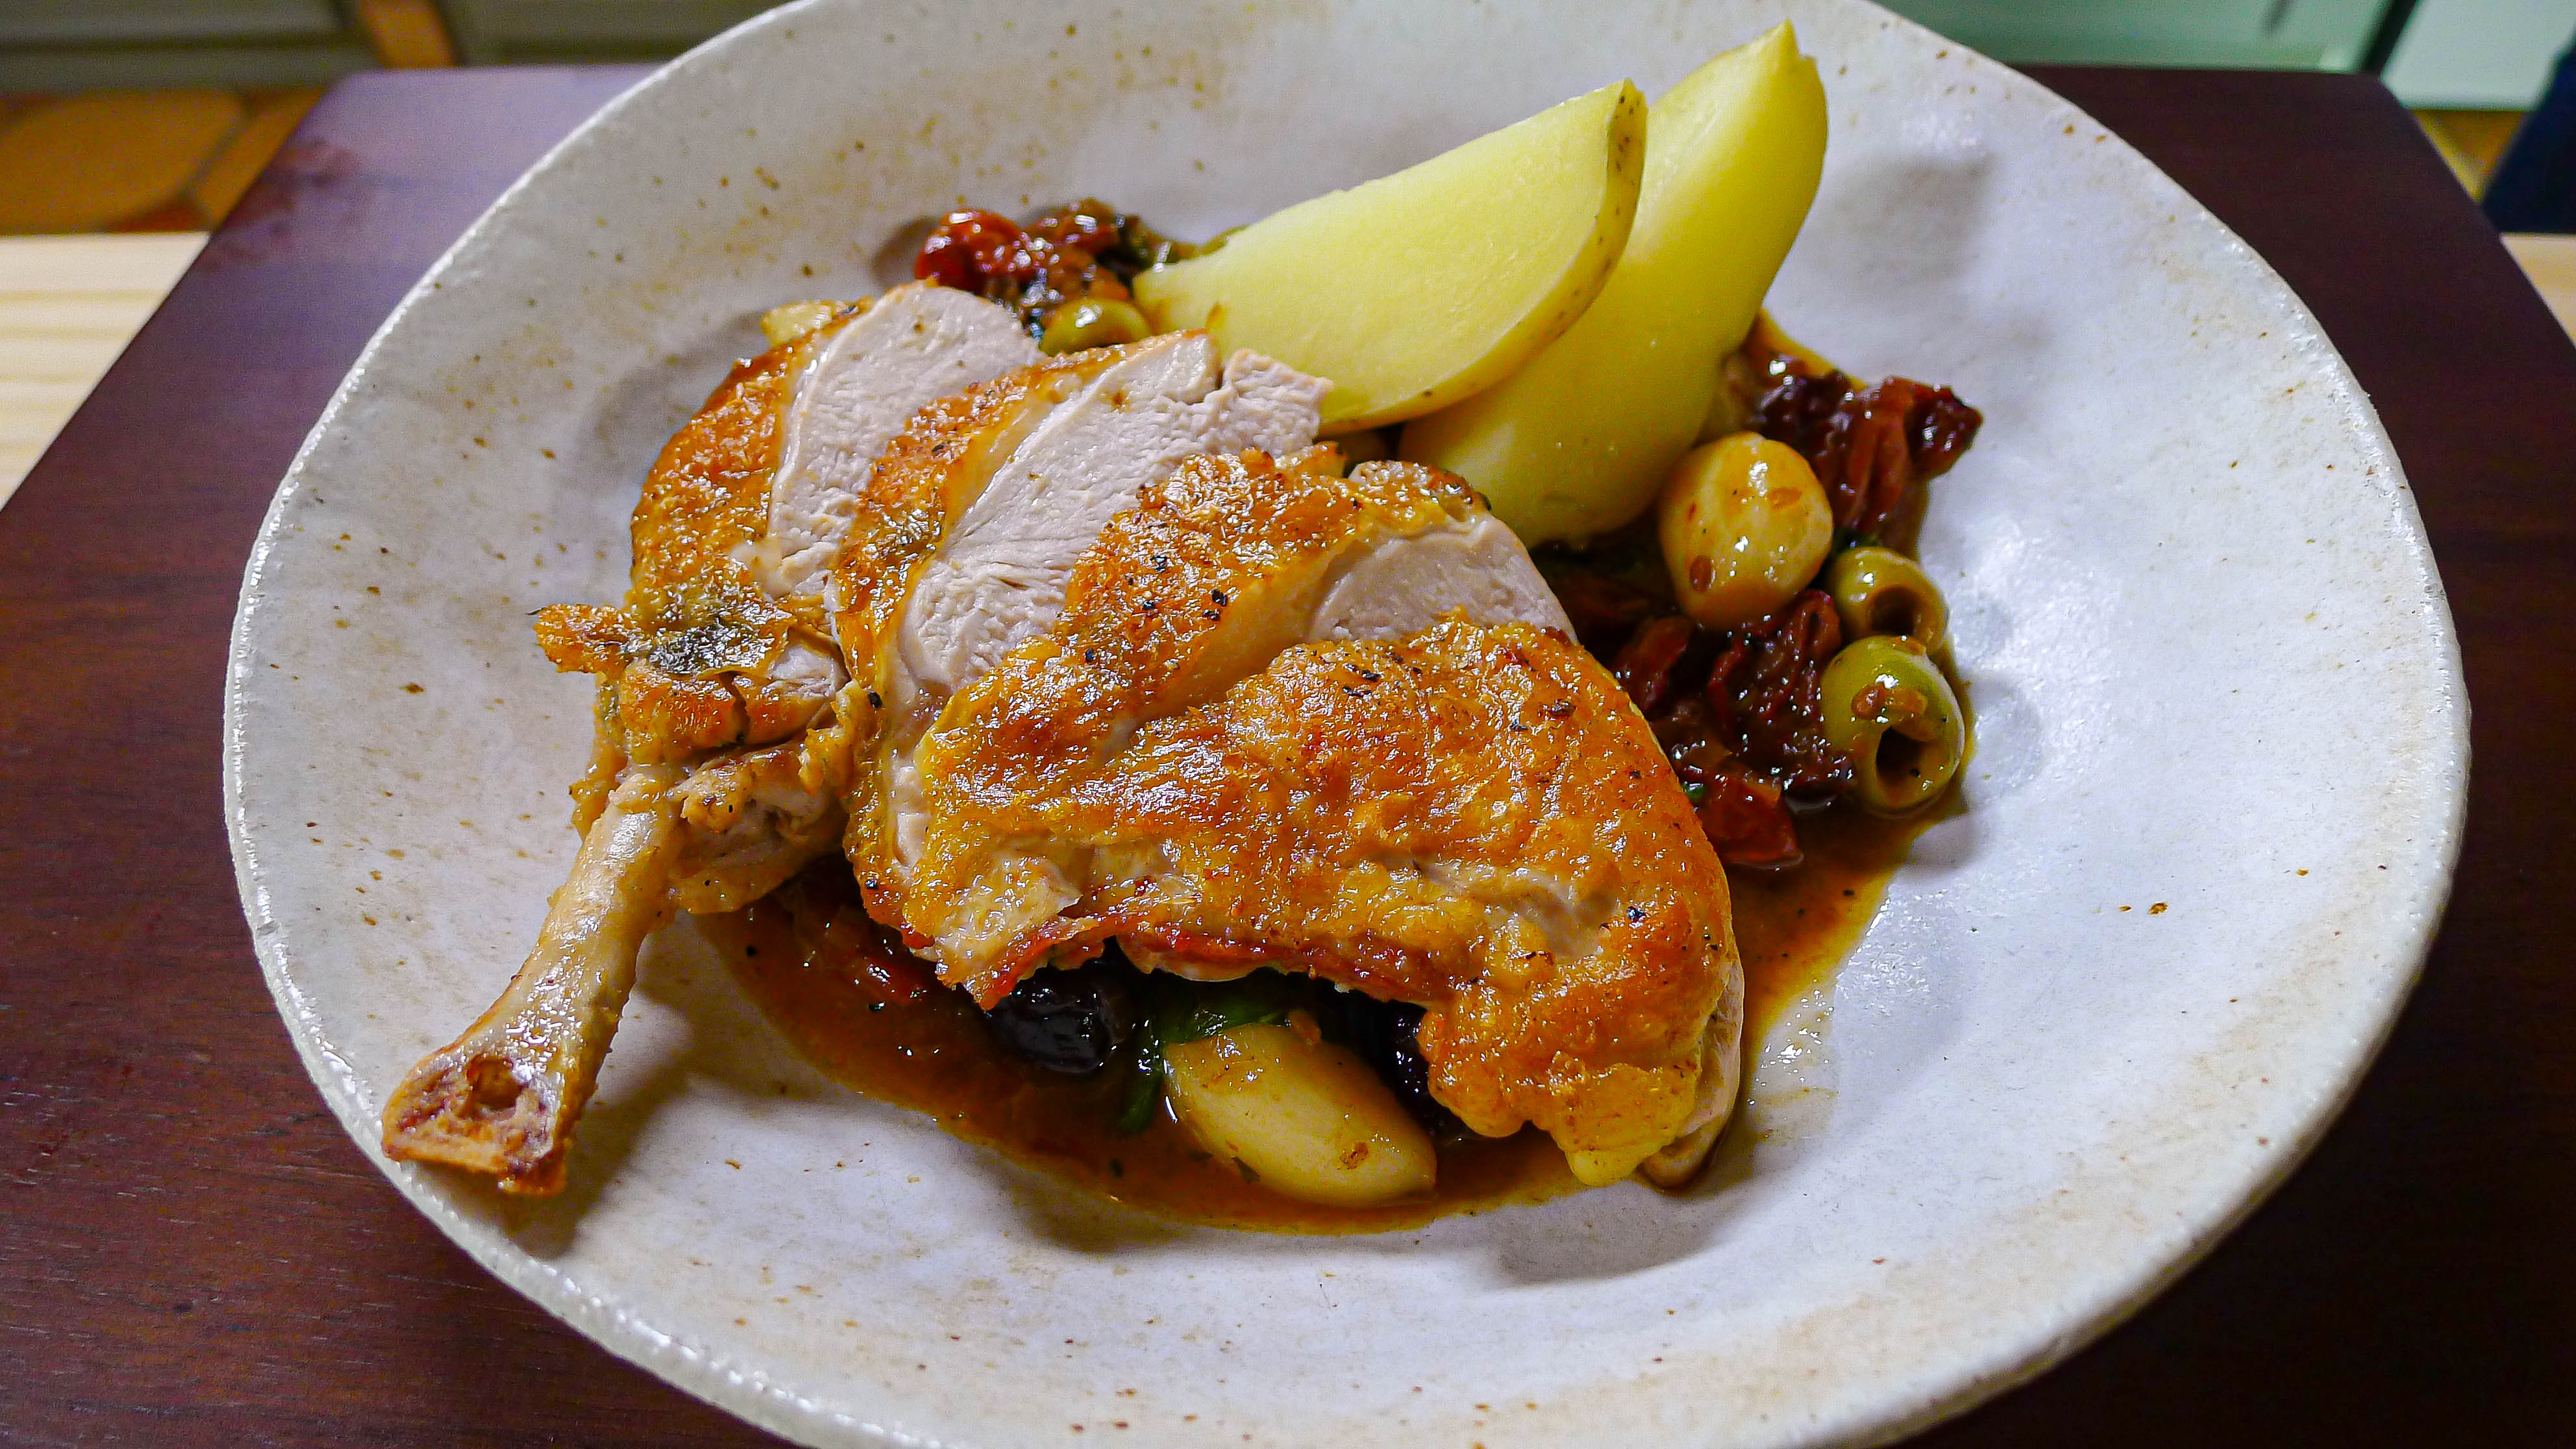 A guinea fowl dish with olives